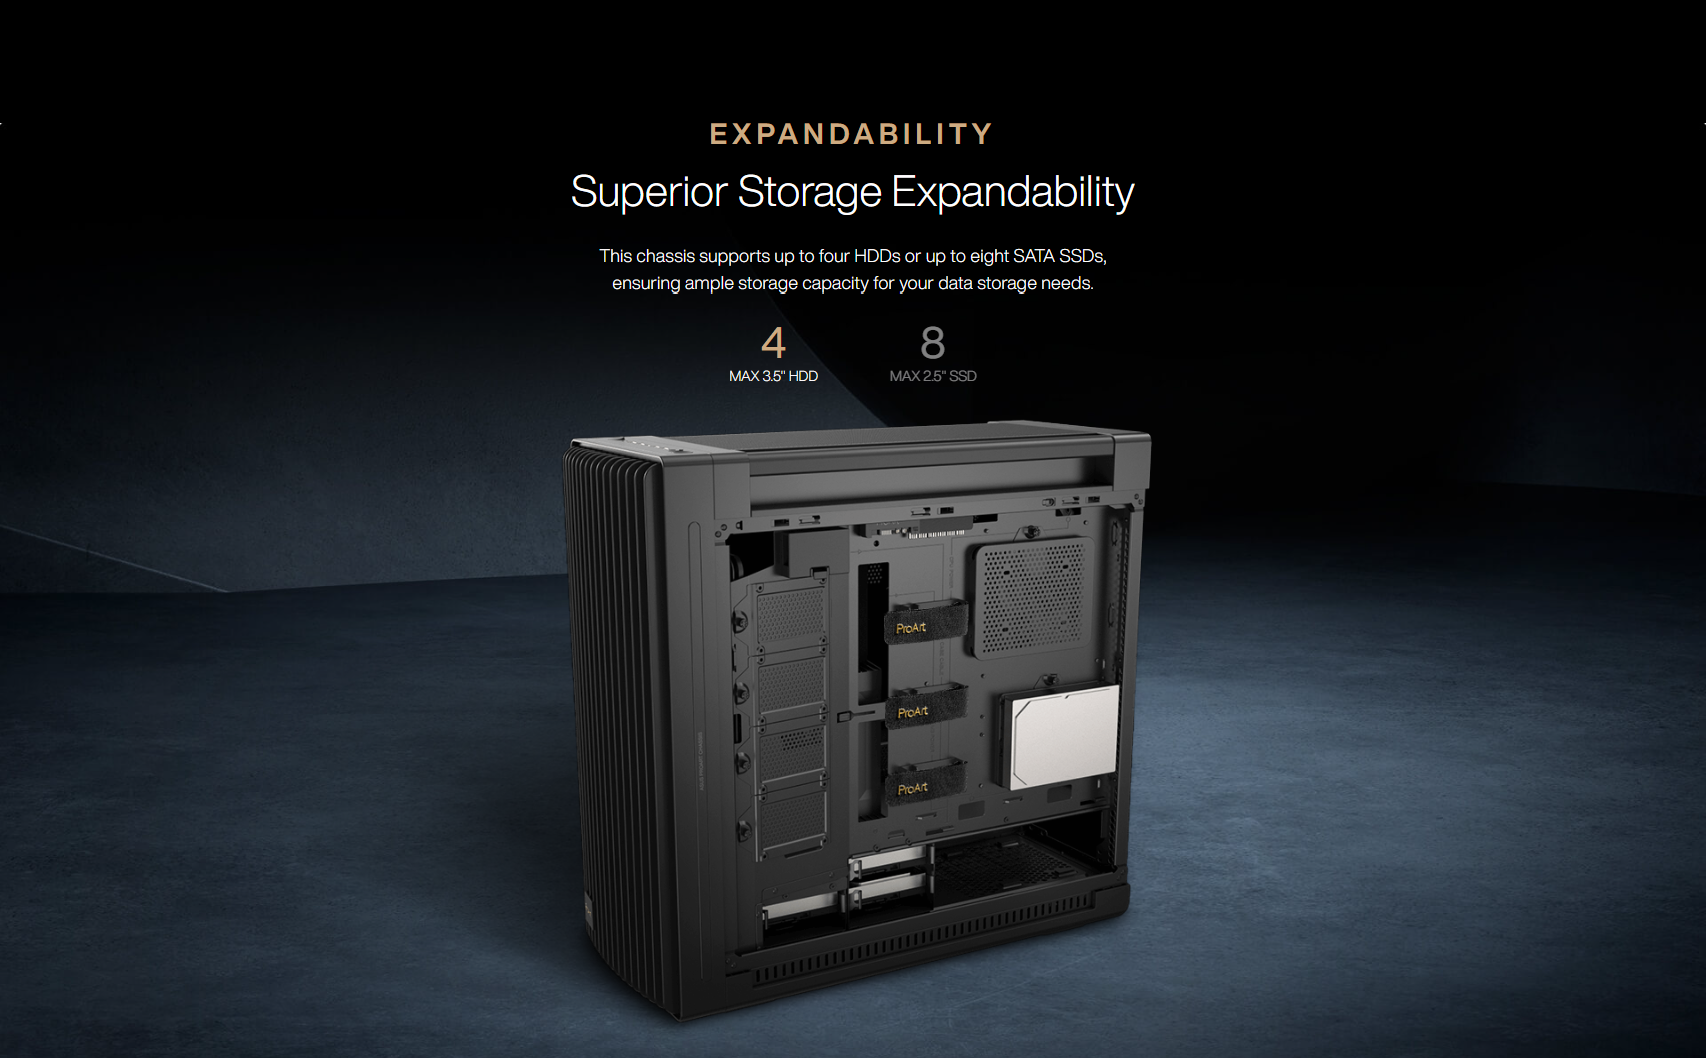 This chassis supports up to four HDDs or up to eight SATA SSDs, ensuring ample storage capacity for your data storage needs.